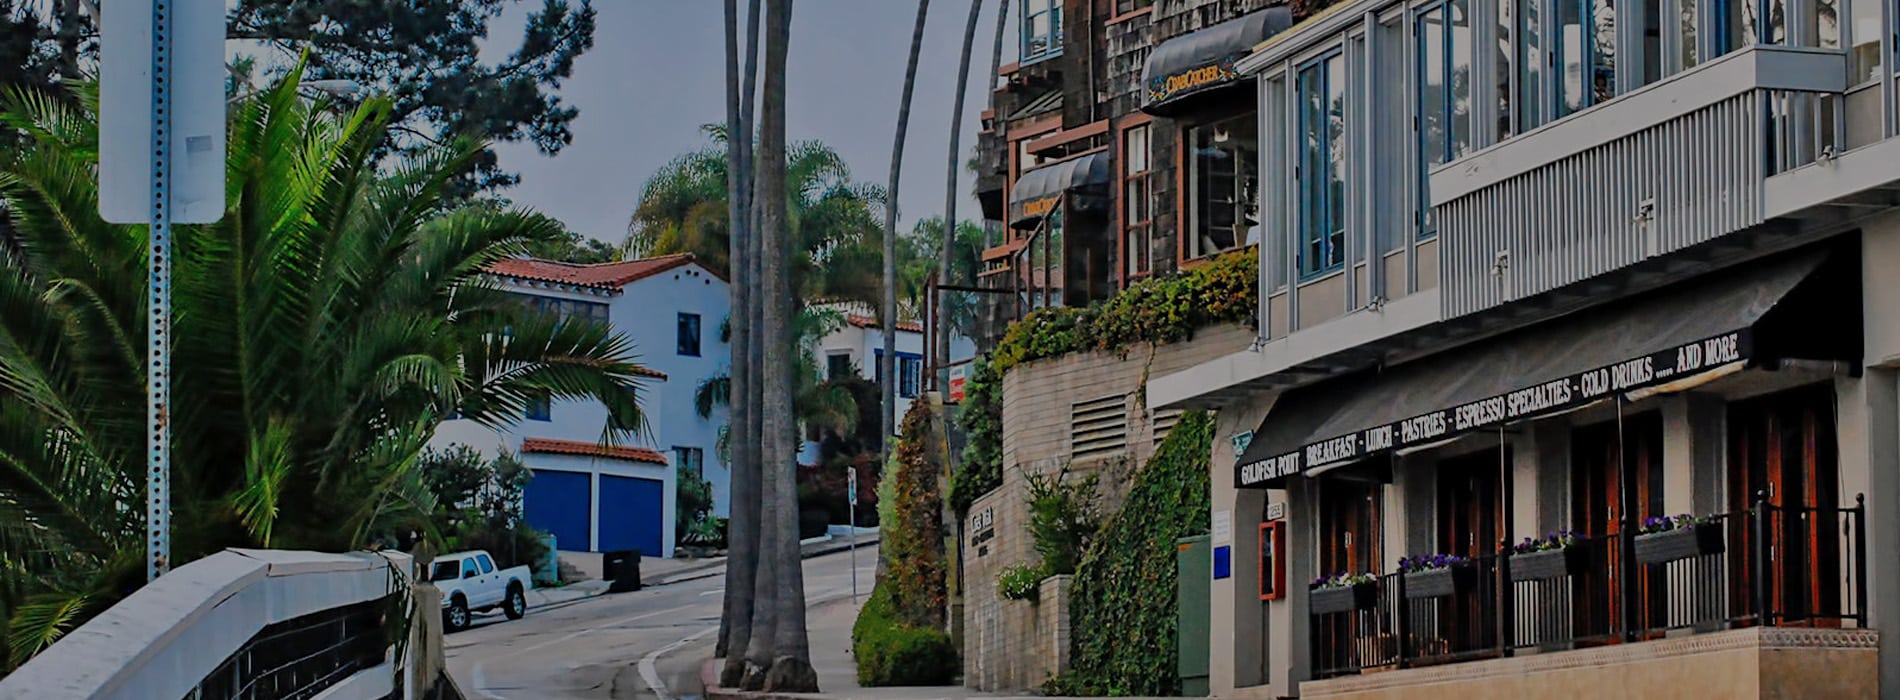 View of a picturesque street in La Jolla. Discover homes for sale opportunities in San Diego